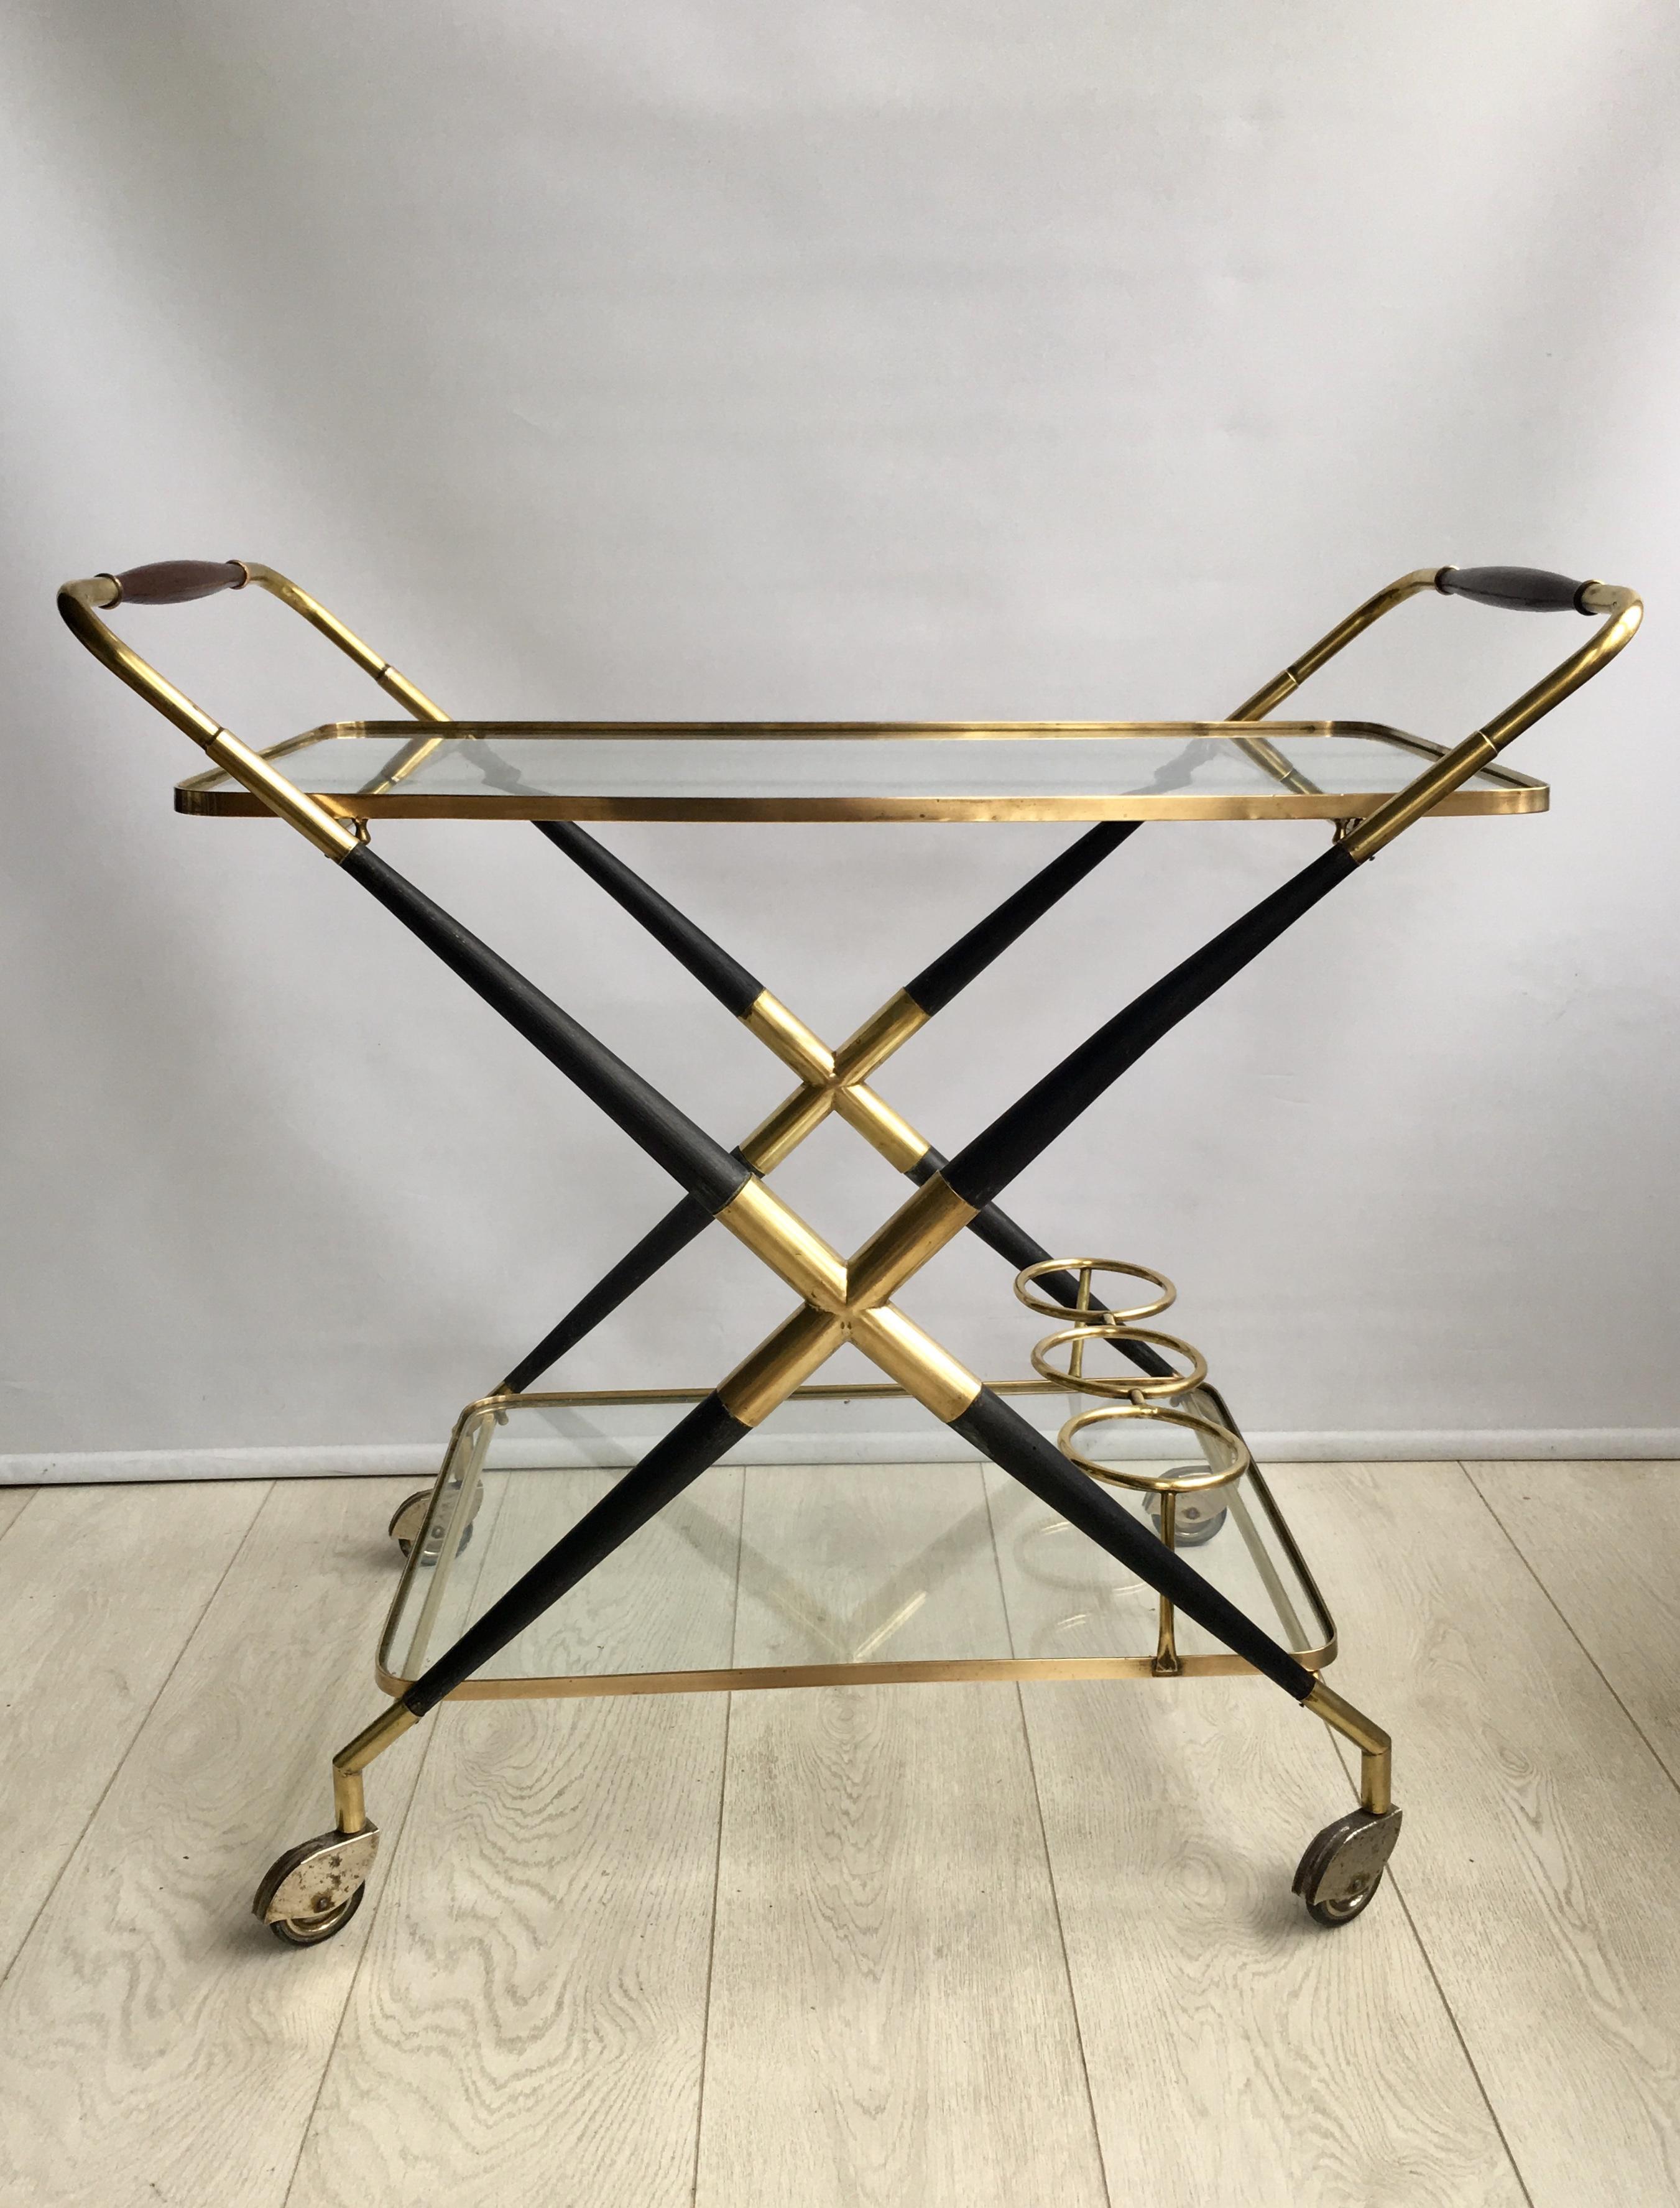 A fantastic midcentury bar cart by Cesare Lacca, Italy

In stained laquered beech and brass with a design typical for Lacca. 

Two tiers with clear glass and a holder for three bottles at the bottom.
 